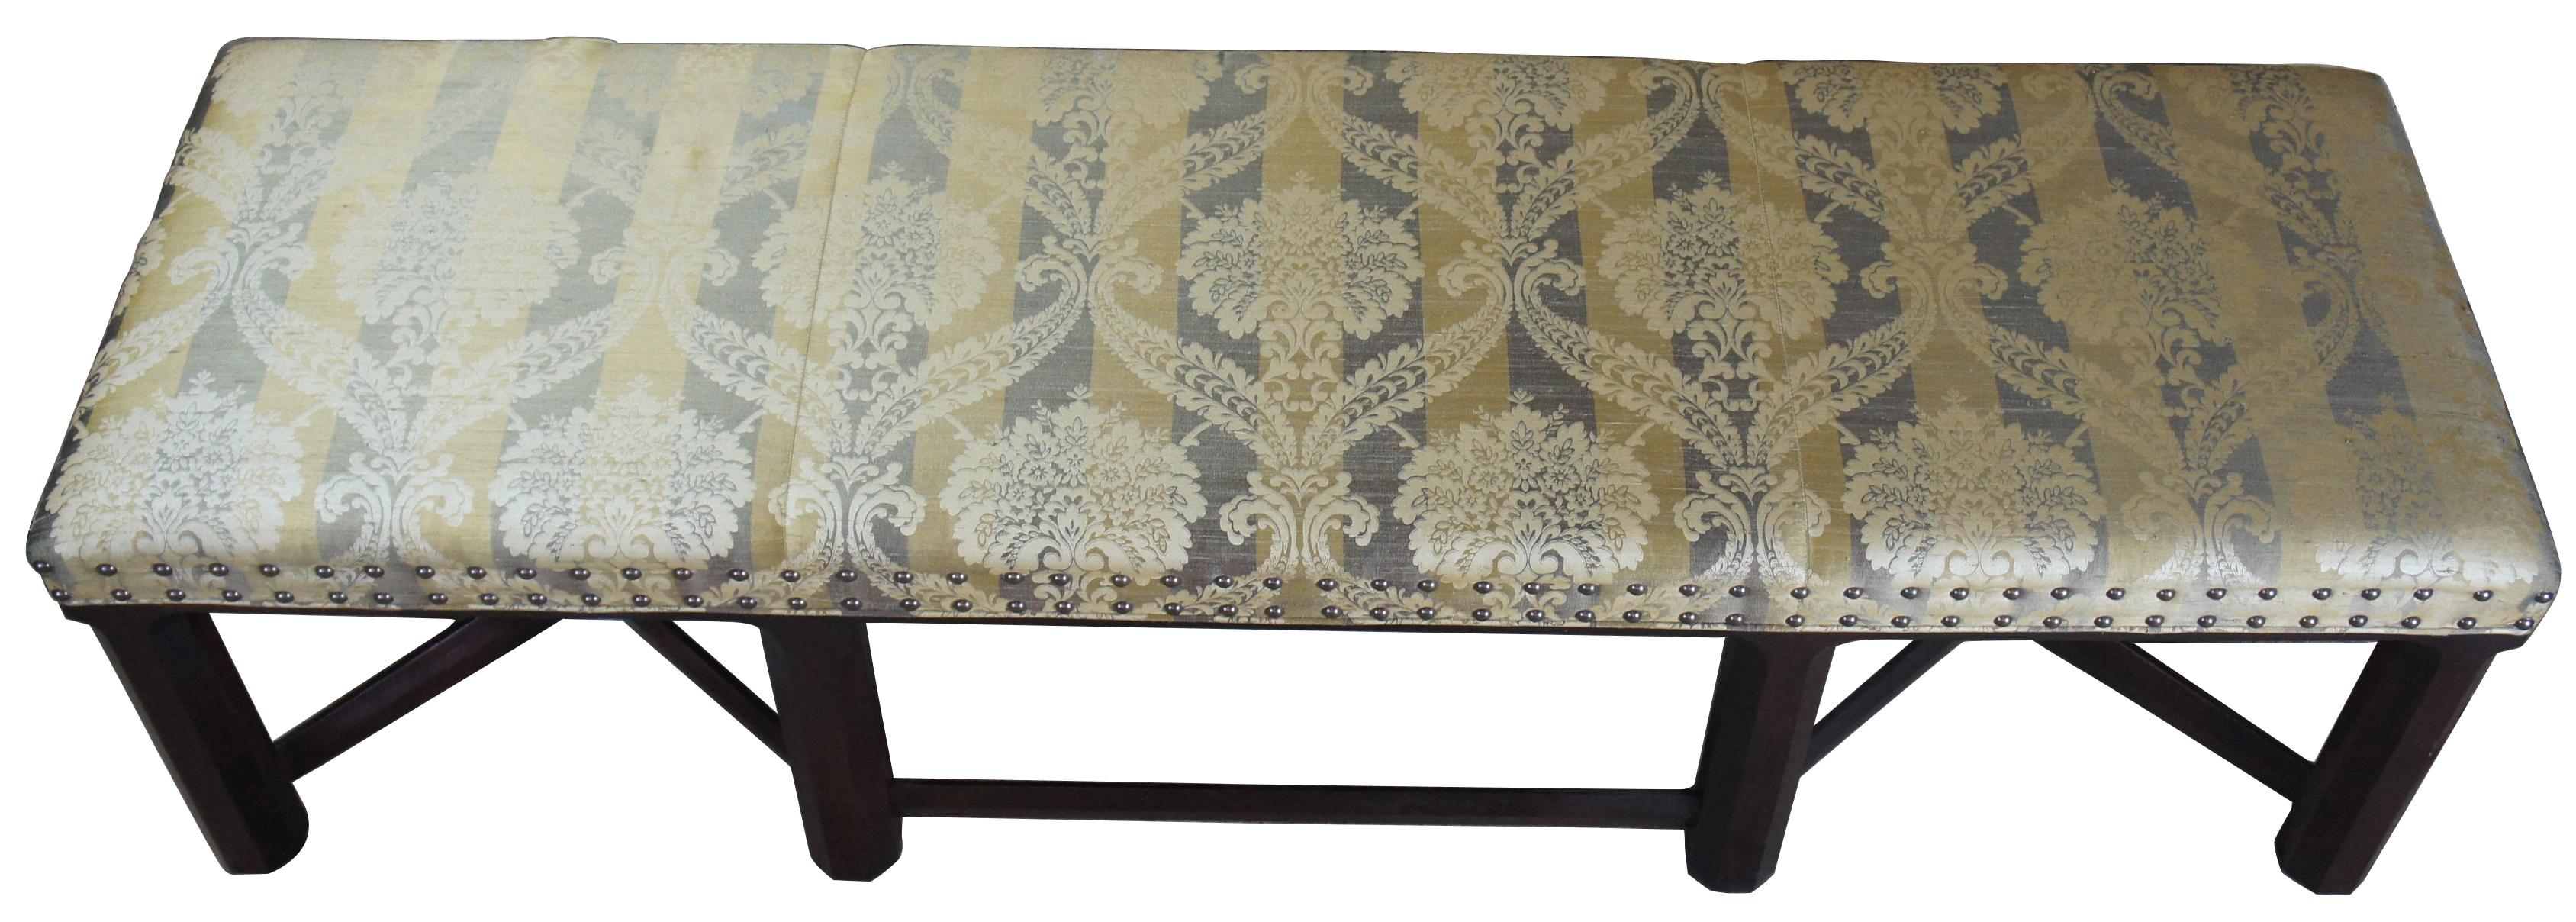 Hickory Chair trestle bench 2009-88. Made by Mark Hampton for the Thomas O'Brein collection. Features 19th century English styling with mahogany X joined base and Scalamandre style fabirc accented in nailhead trim. Purchased from the Henredon